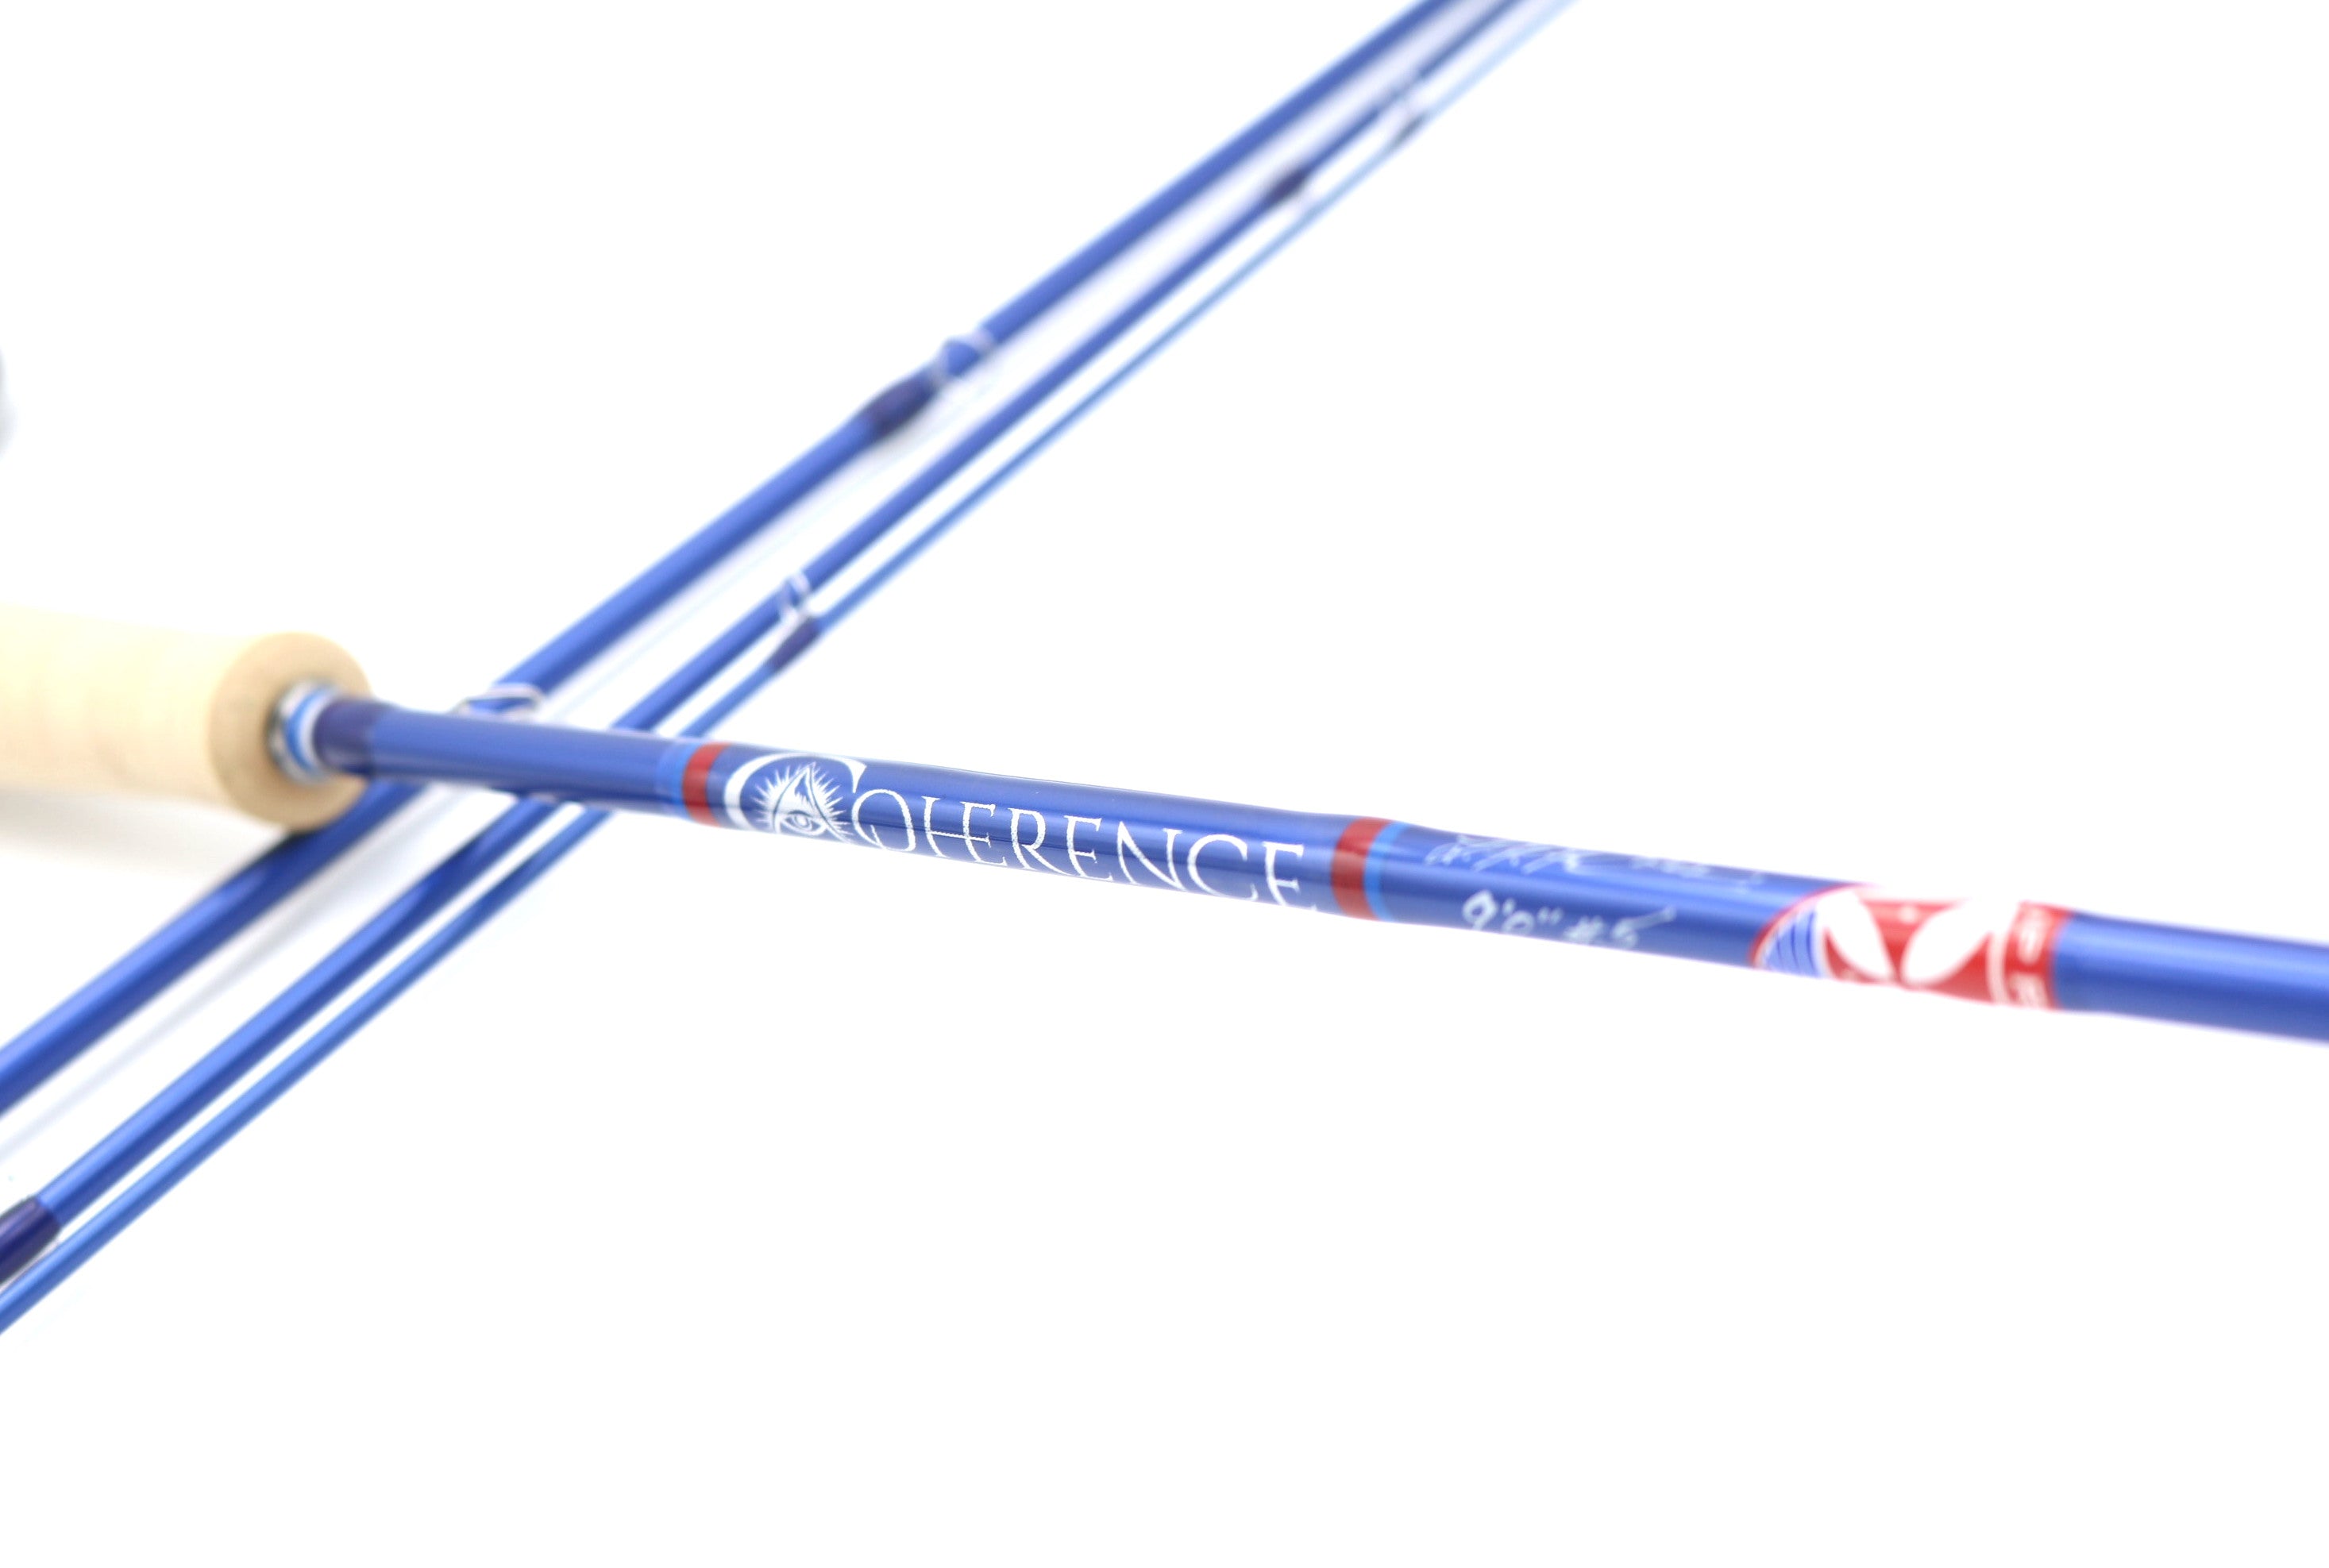 Coherence plus 9 foot 4 piece fast action